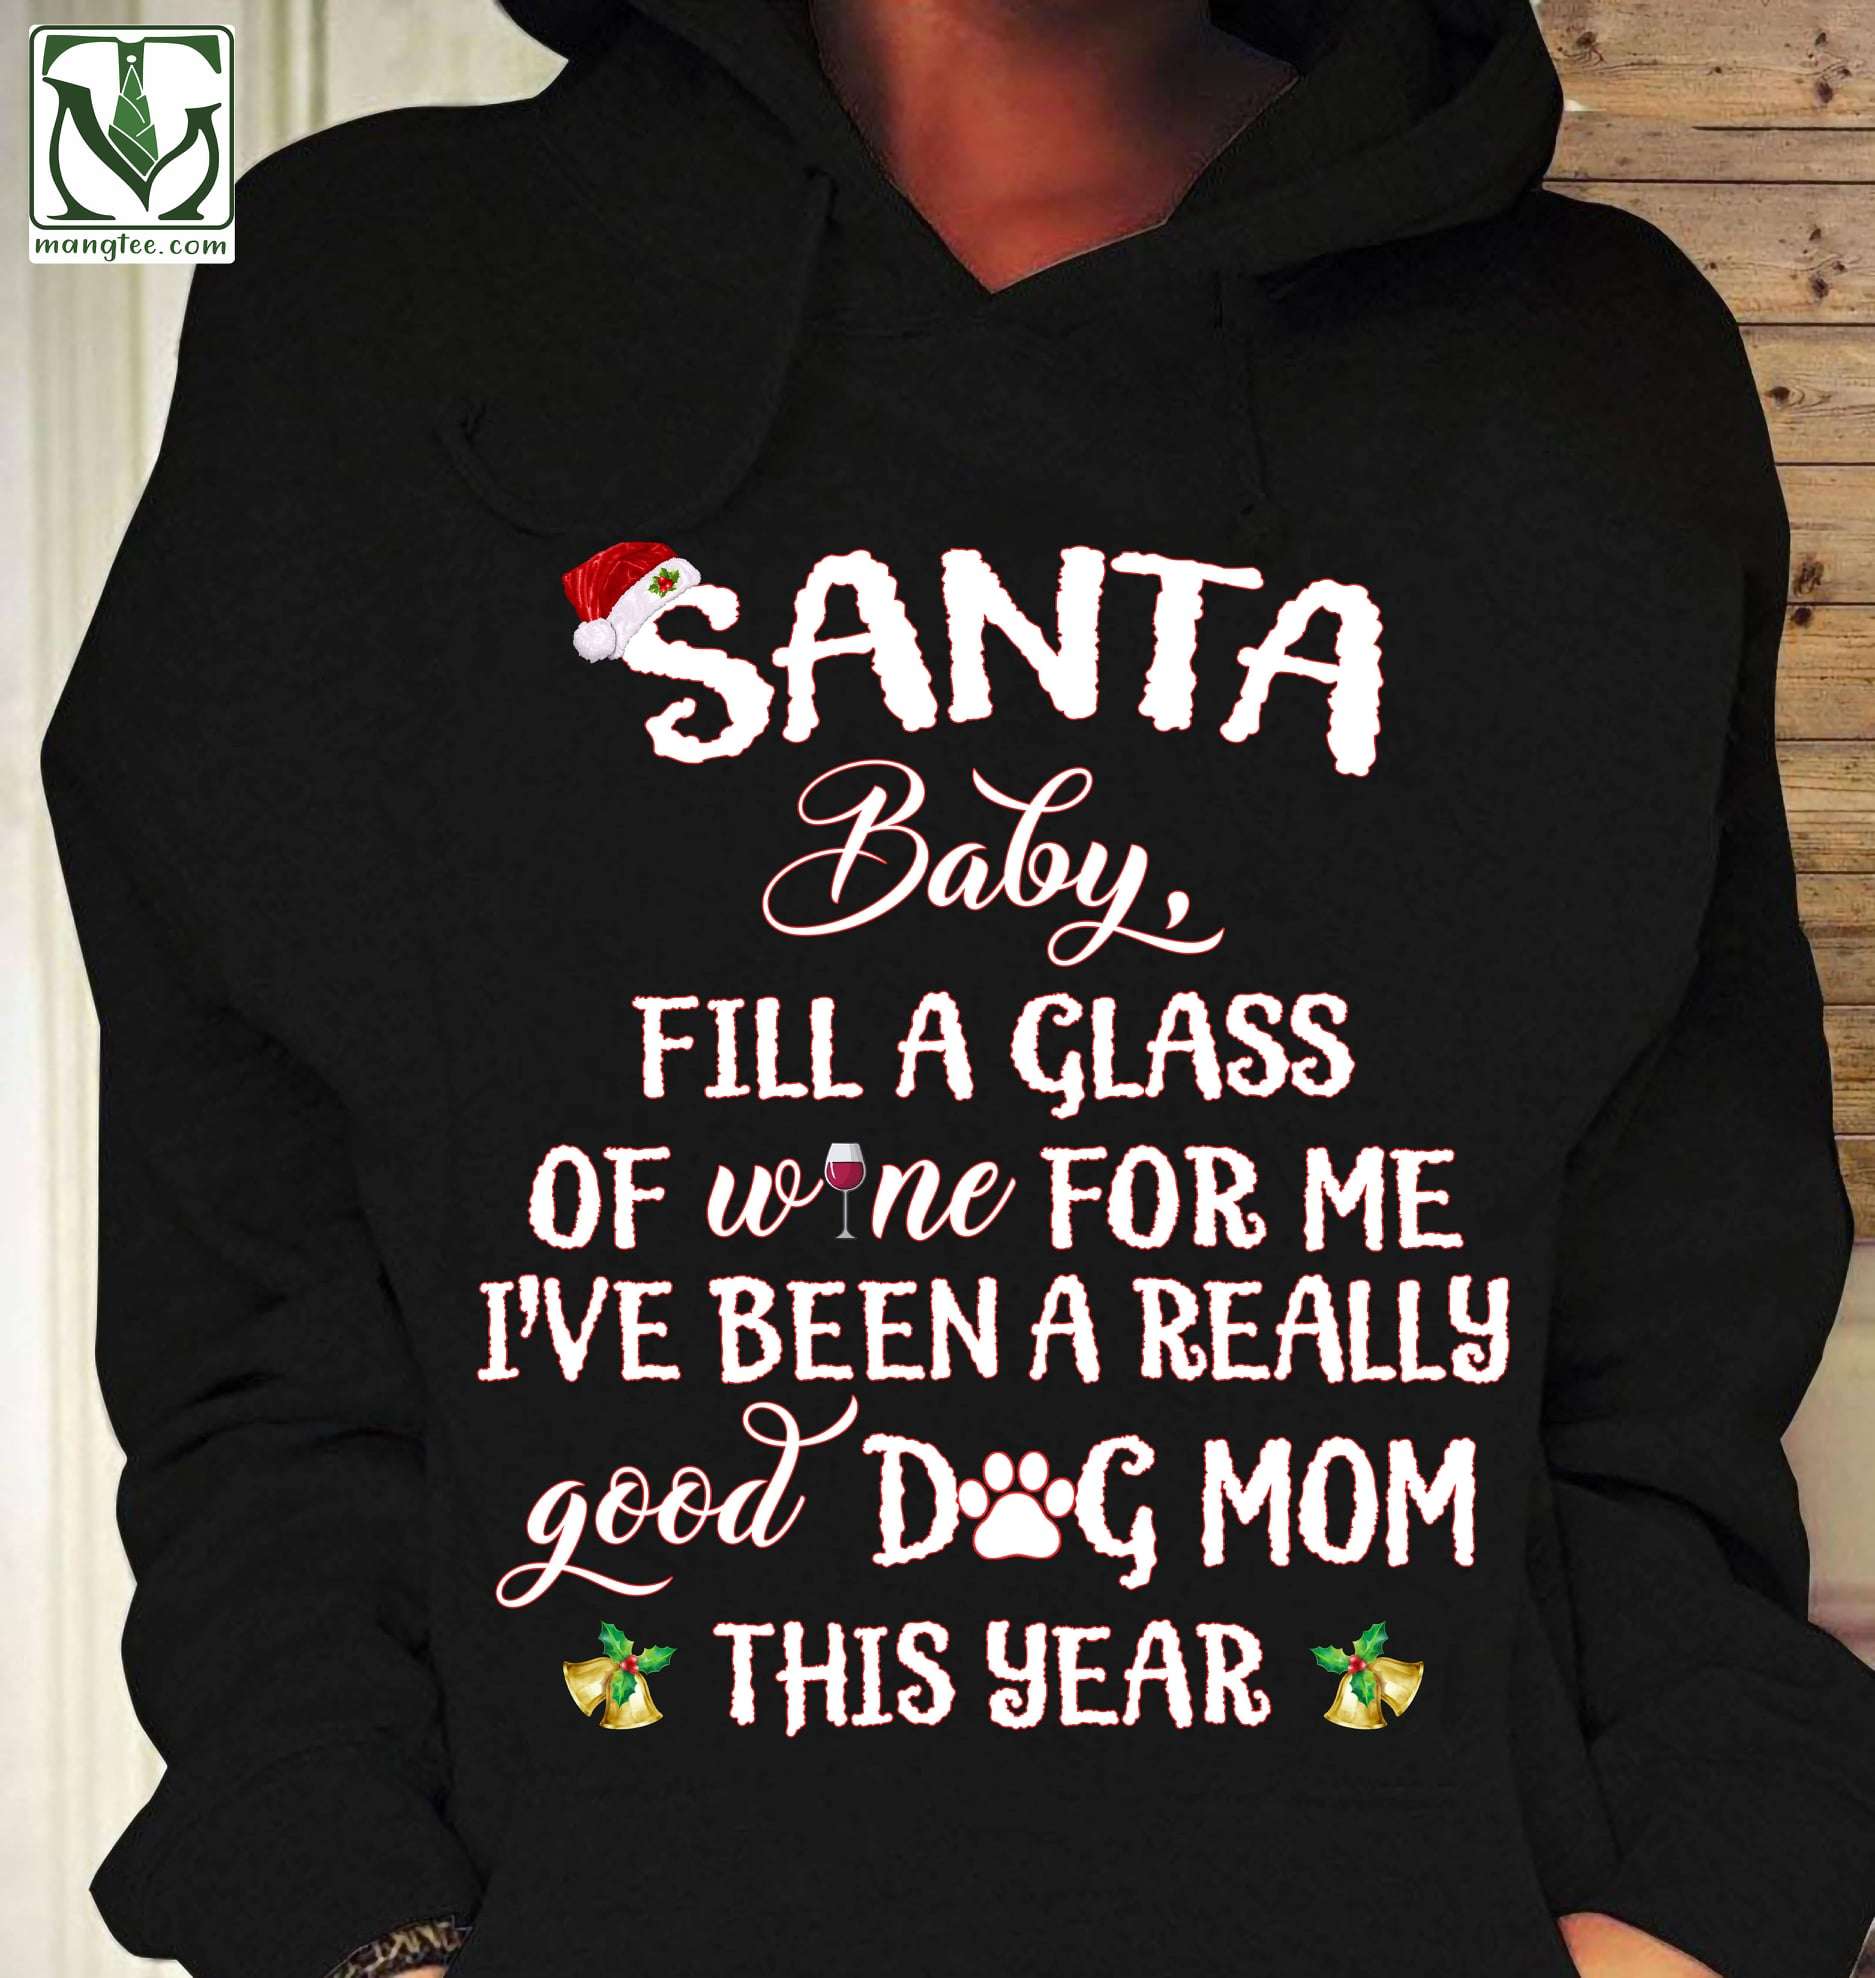 Santa baby, fill a glass of wine for me I've been a really good dog mom this year - Merry Christmas, Dog mom santa gift